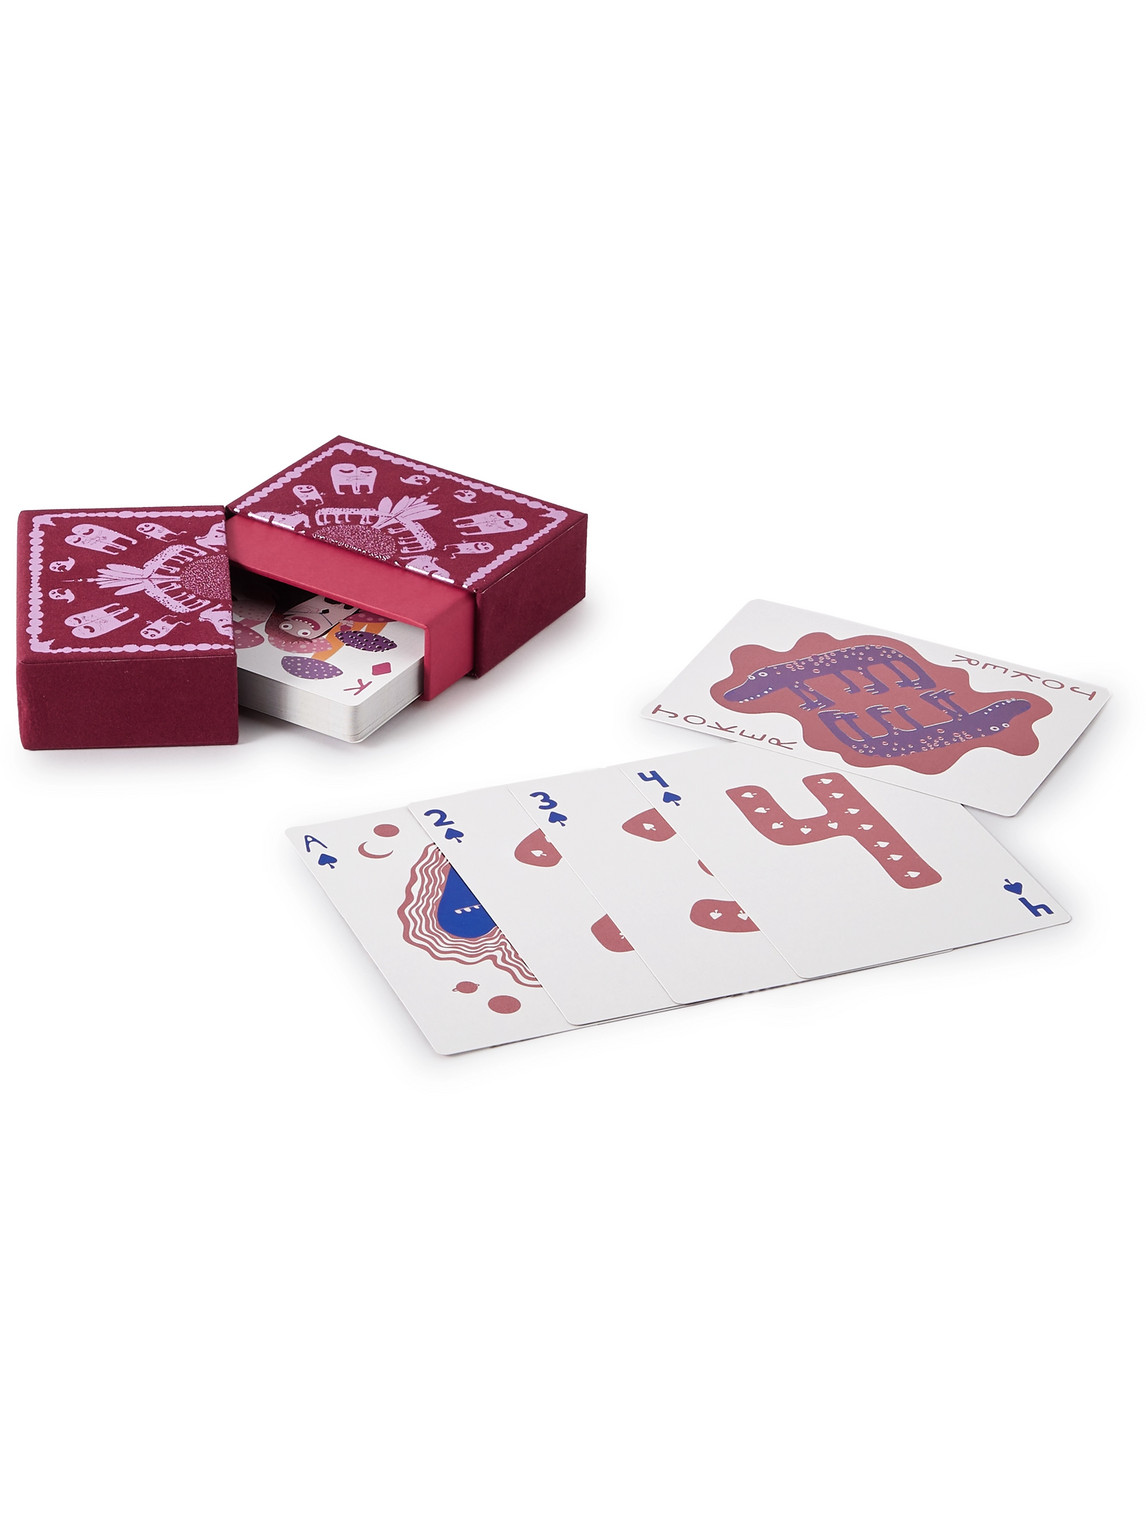 L'Objet - Haas Brothers Jumbo Playing Cards and Velvet Case - Men - Red von L'Objet